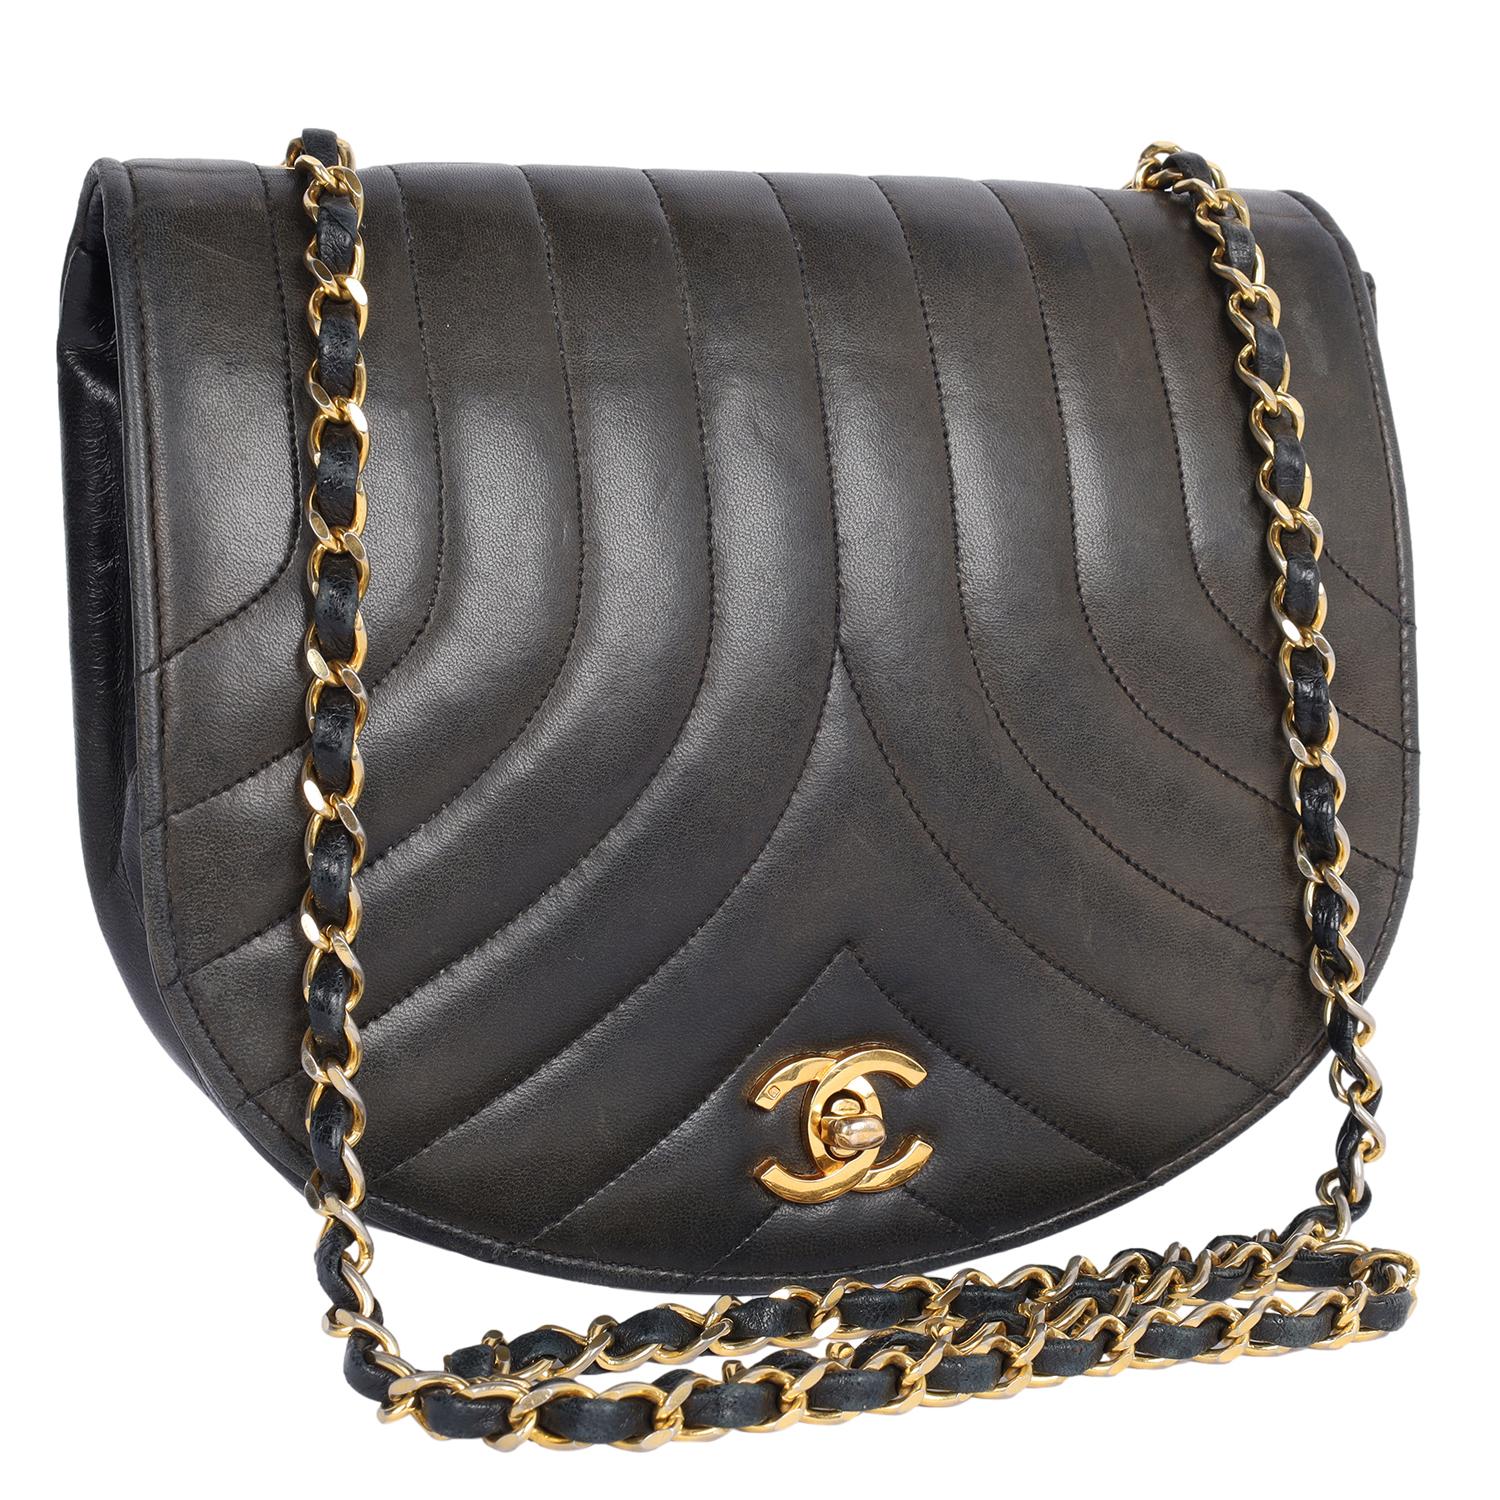 Authentic, pre-loved Chanel black quilted lambskin classic flap shoulder bag. This stylish vintage shoulder bag is crafted of luxurious lambskin leather. The bag features a gold chain link leather threaded shoulder strap and a gold Chanel CC